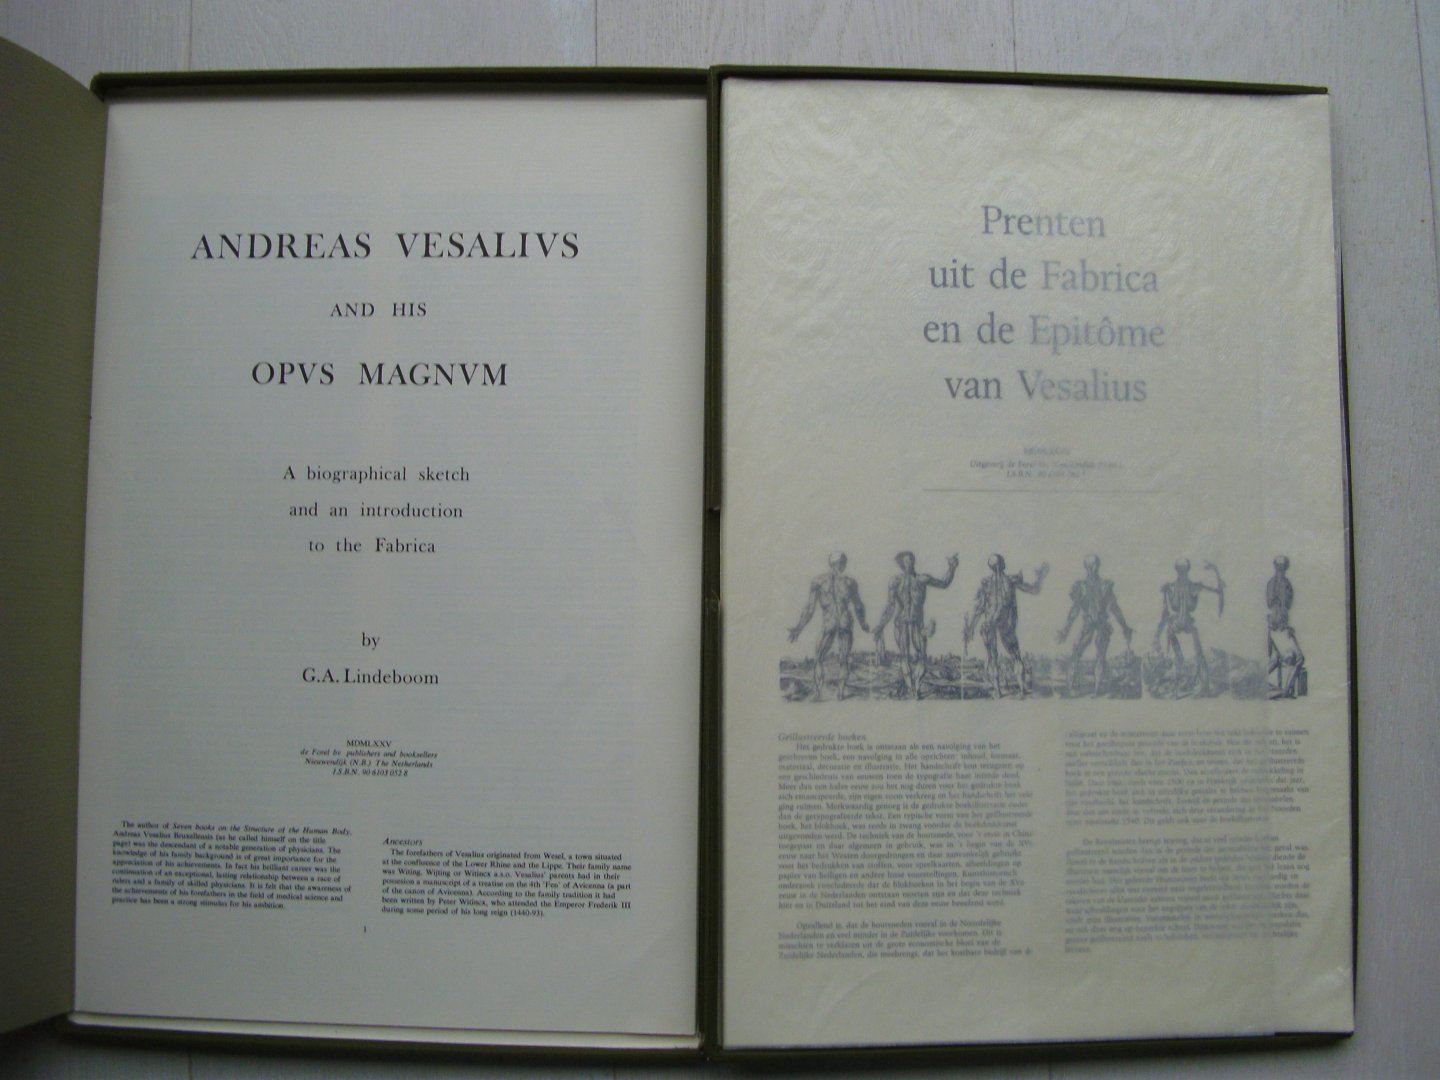 Lindeboom, G.A. - Andreas Vesalius and his Opus Magnum(A biographical sketch and an introduction to the Fabrica)